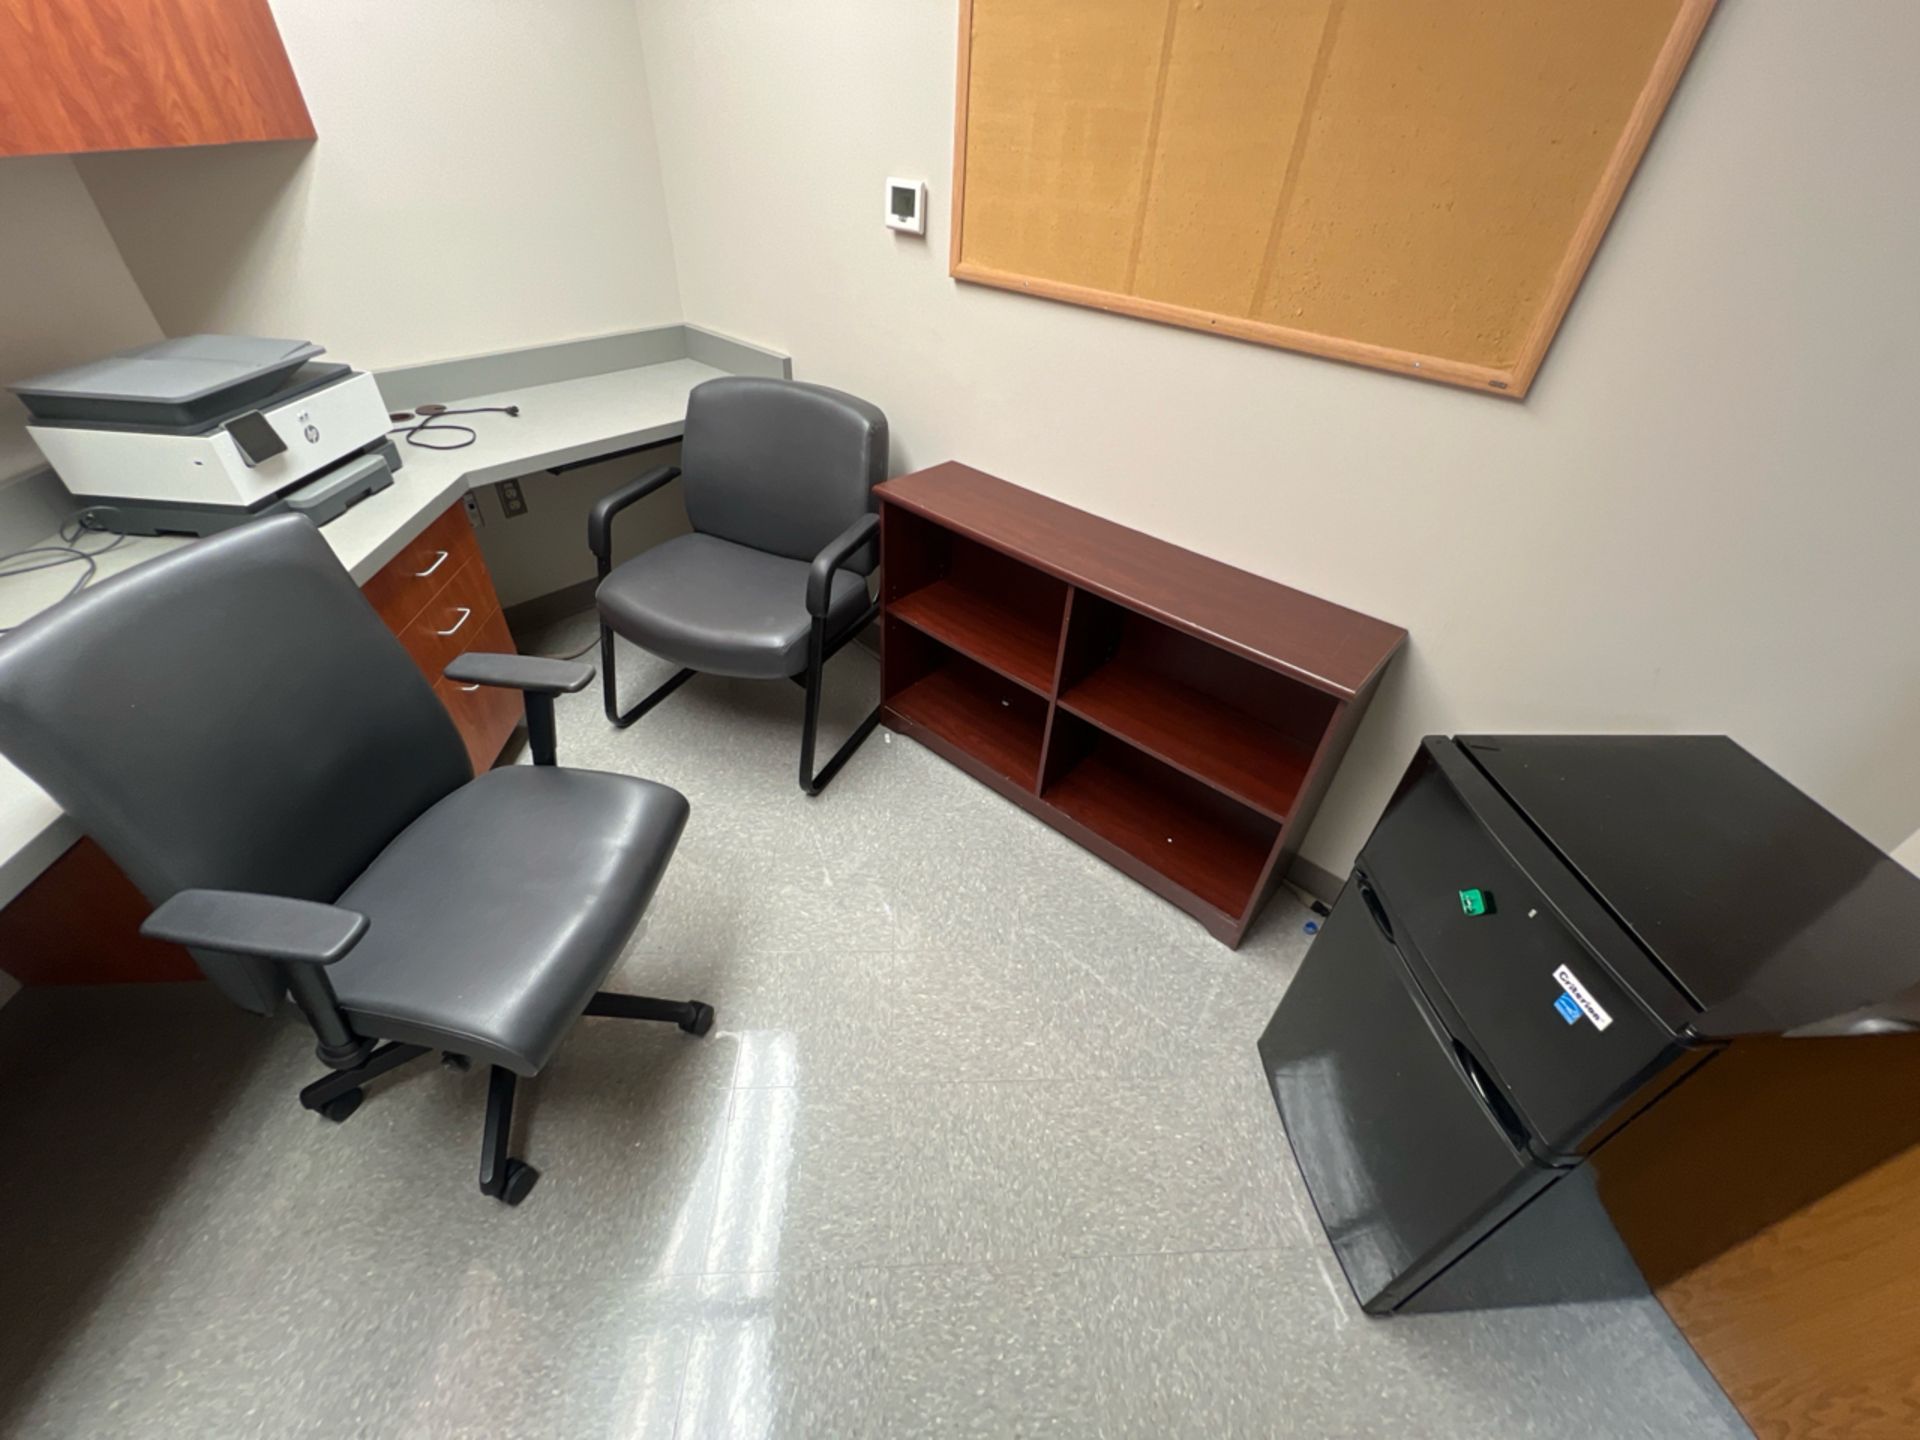 OFFICE TO INCLUDE: BOOKSHELF, HP PRINTER, CRITHERION MINI-FRIDGE, CHAIRS